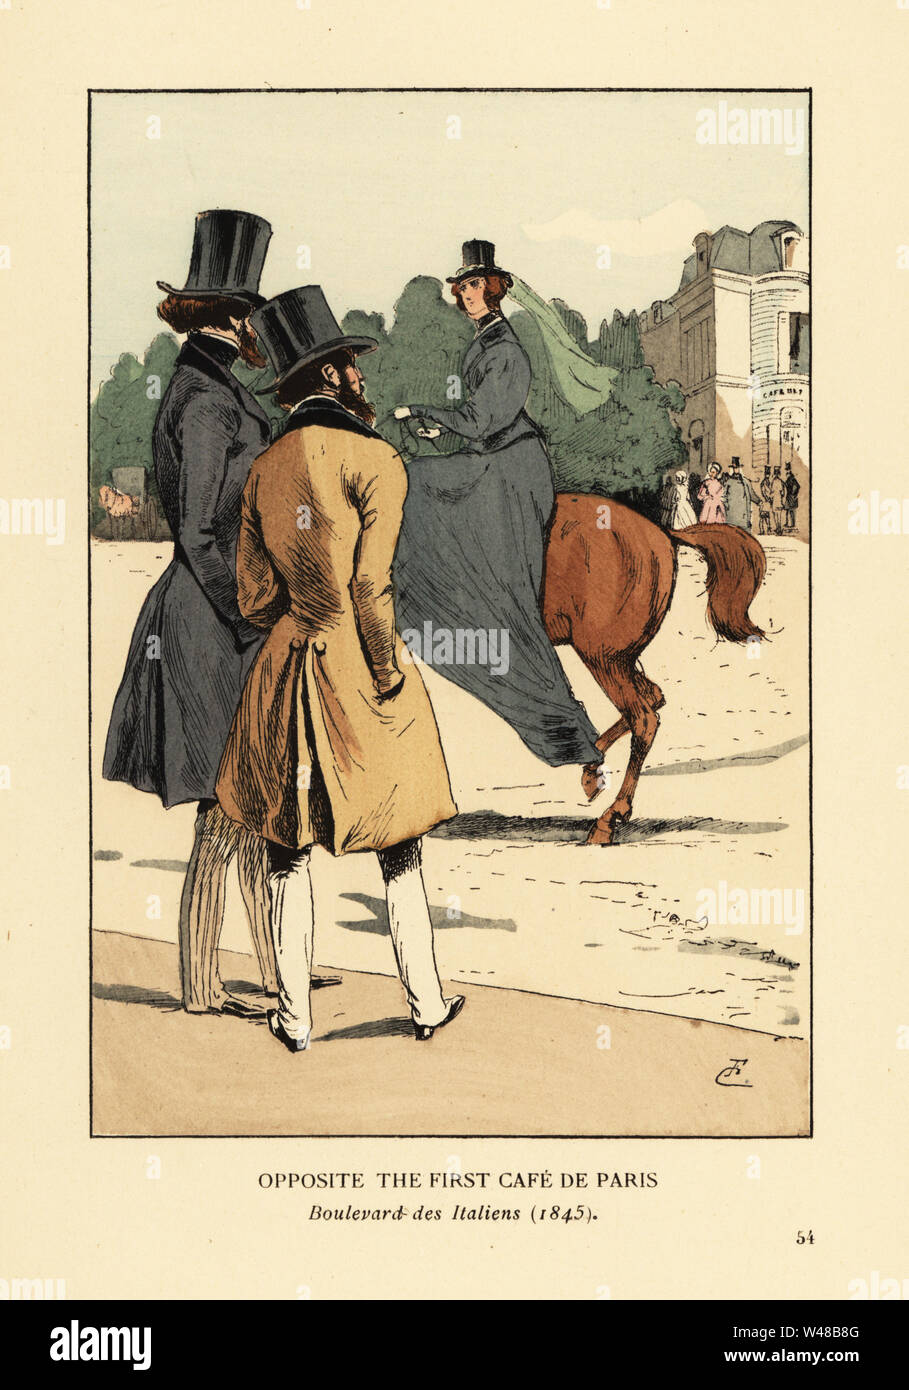 Opposite the first Cafe de Paris, Boulevard des Italiens, 1845. Two bearded dandies in redingotes and top hats watch a woman in long riding dress side-saddle on a horse. The cafe was one of several popular restaurants on the boulevard. Handcoloured lithograph by R.V. after an illustration by Francois Courboin from Octave Uzanne’s Fashion in Paris, William Heinemann, London, 1898. Stock Photo